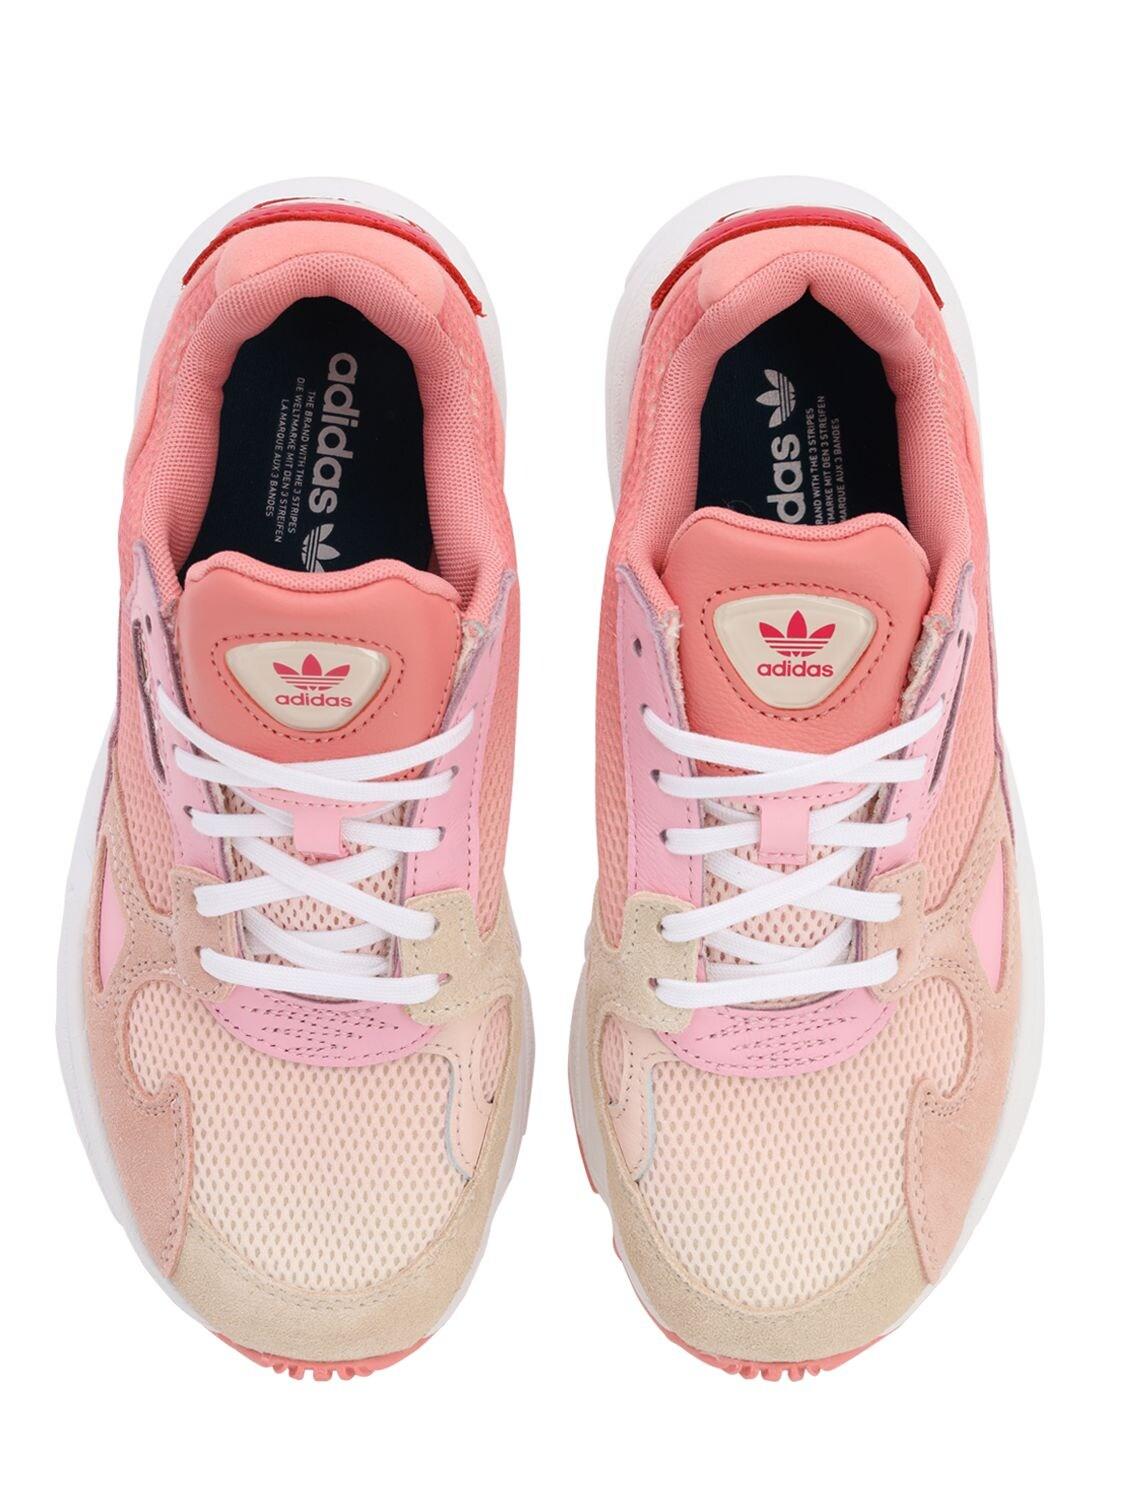 adidas Originals Leather Falcon in Peach/Peach (Pink) - Save 52% | Lyst